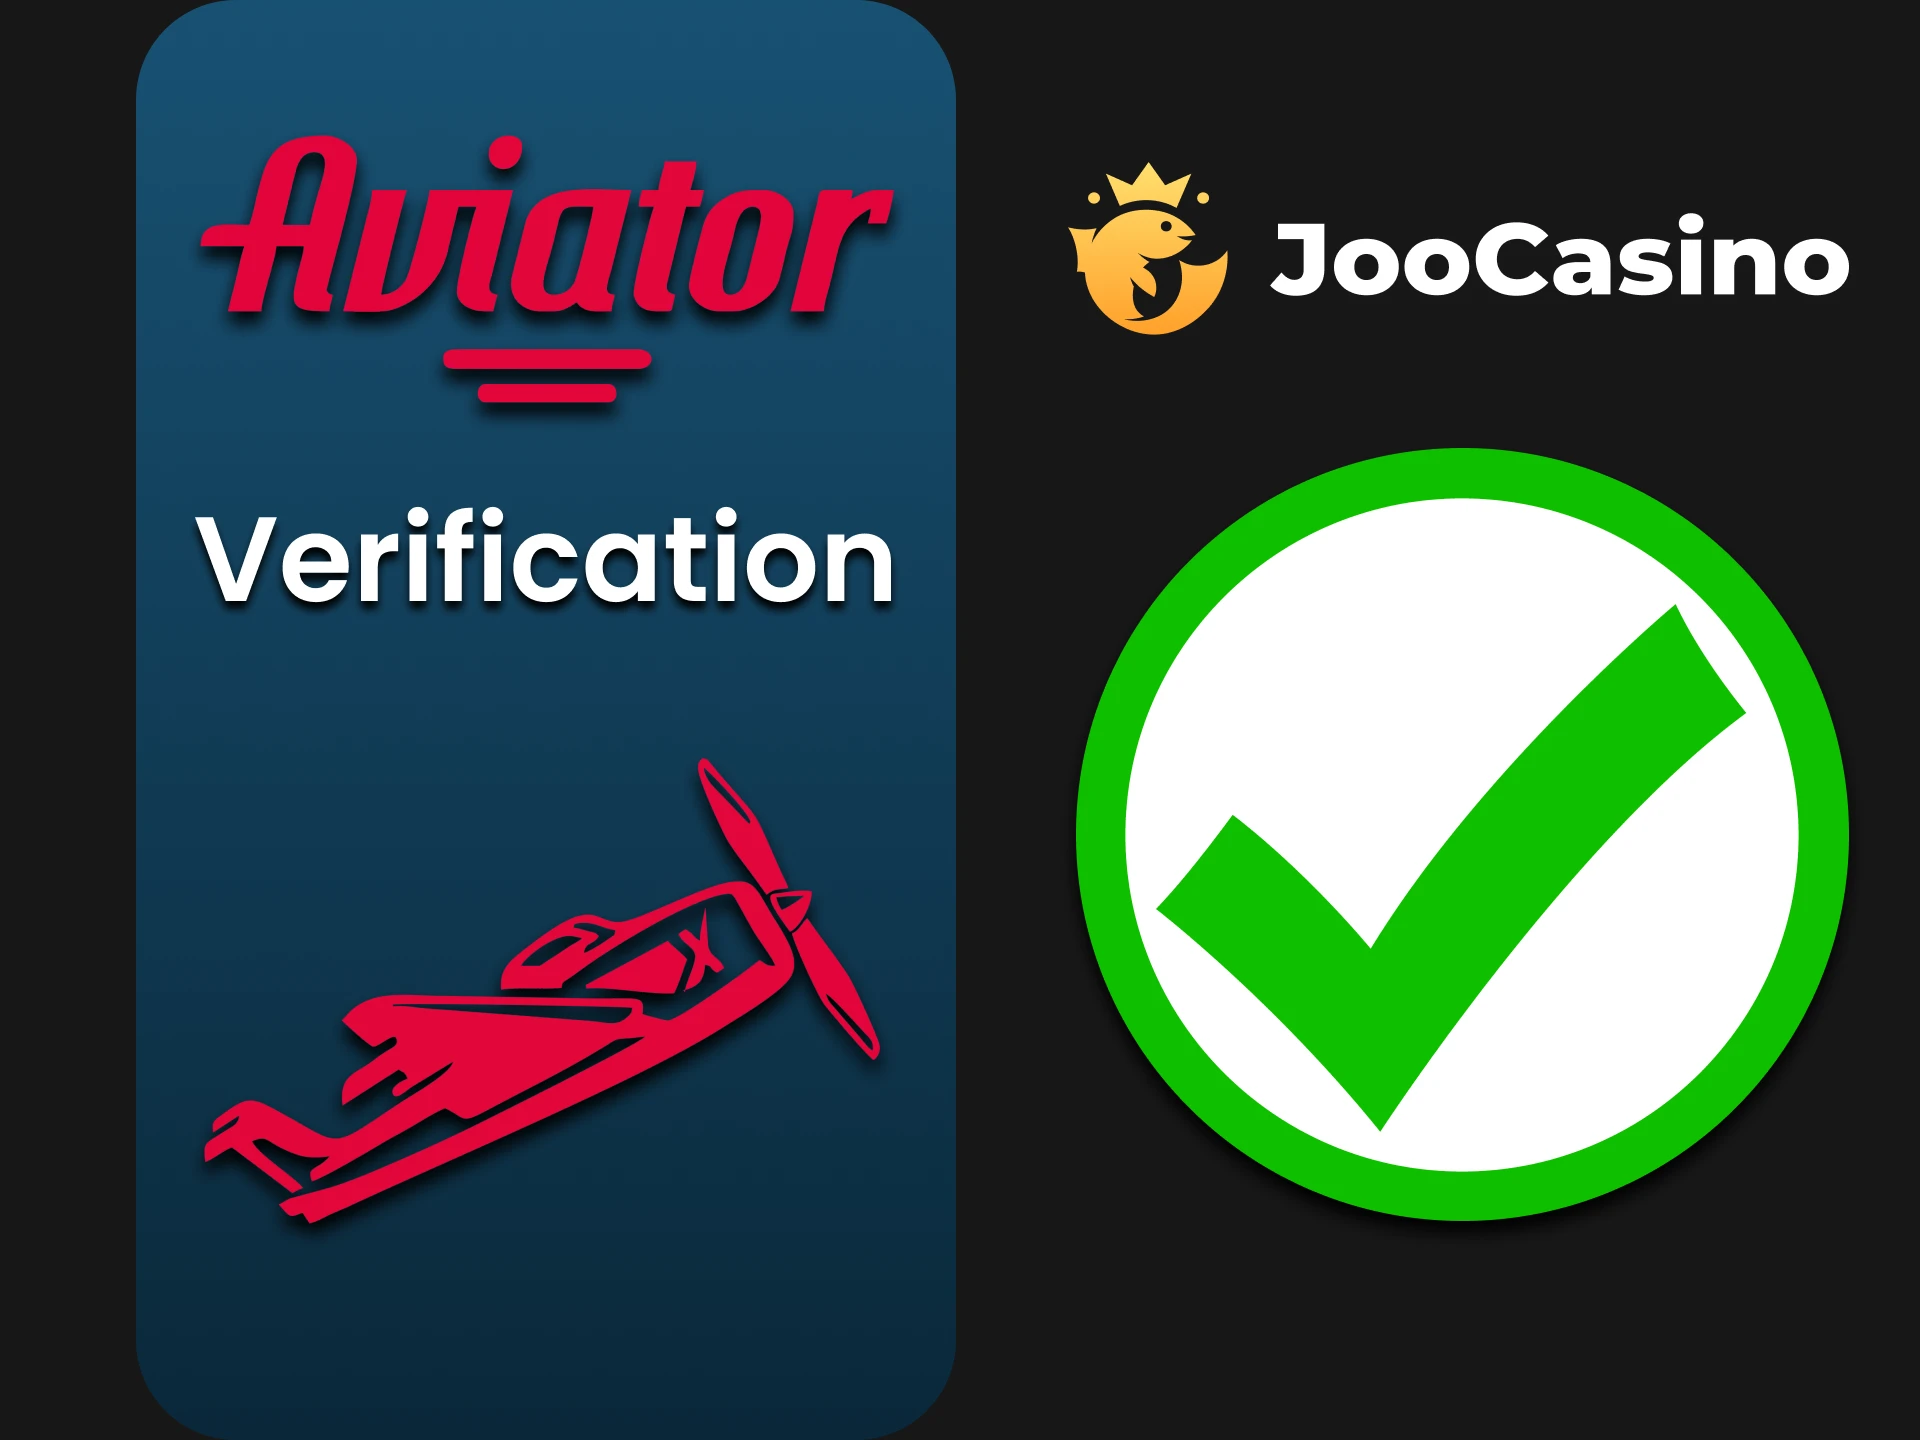 Enter all the data for the Joo Casino website to play Aviator.